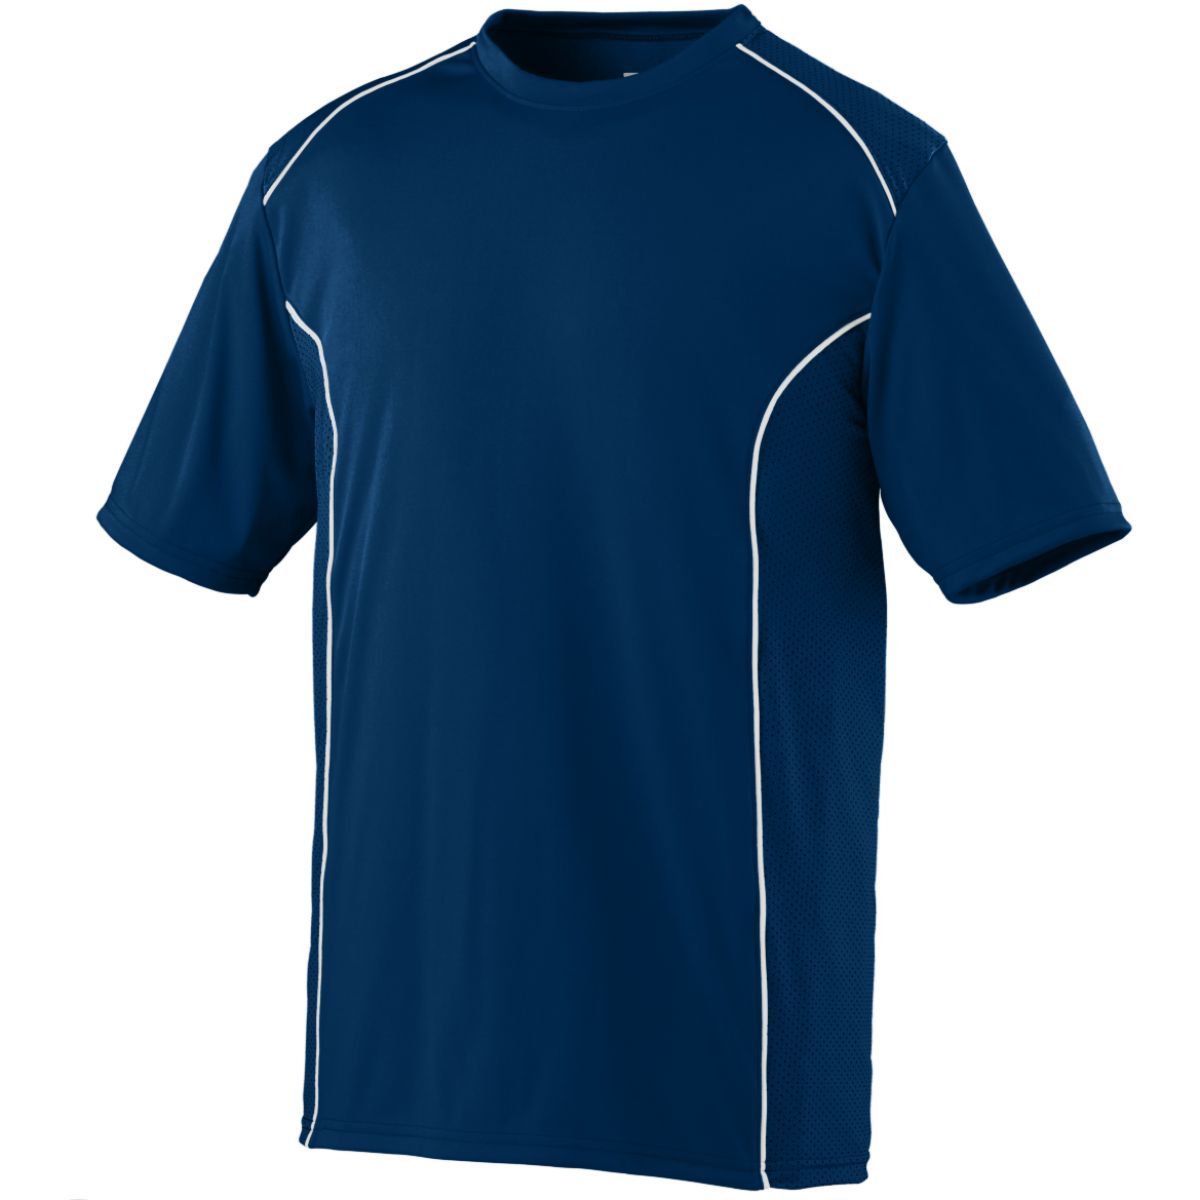 Augusta Sportswear Youth Winning Streak Crew in Navy/White  -Part of the Youth, Augusta-Products, Soccer, All-Sports-1 product lines at KanaleyCreations.com